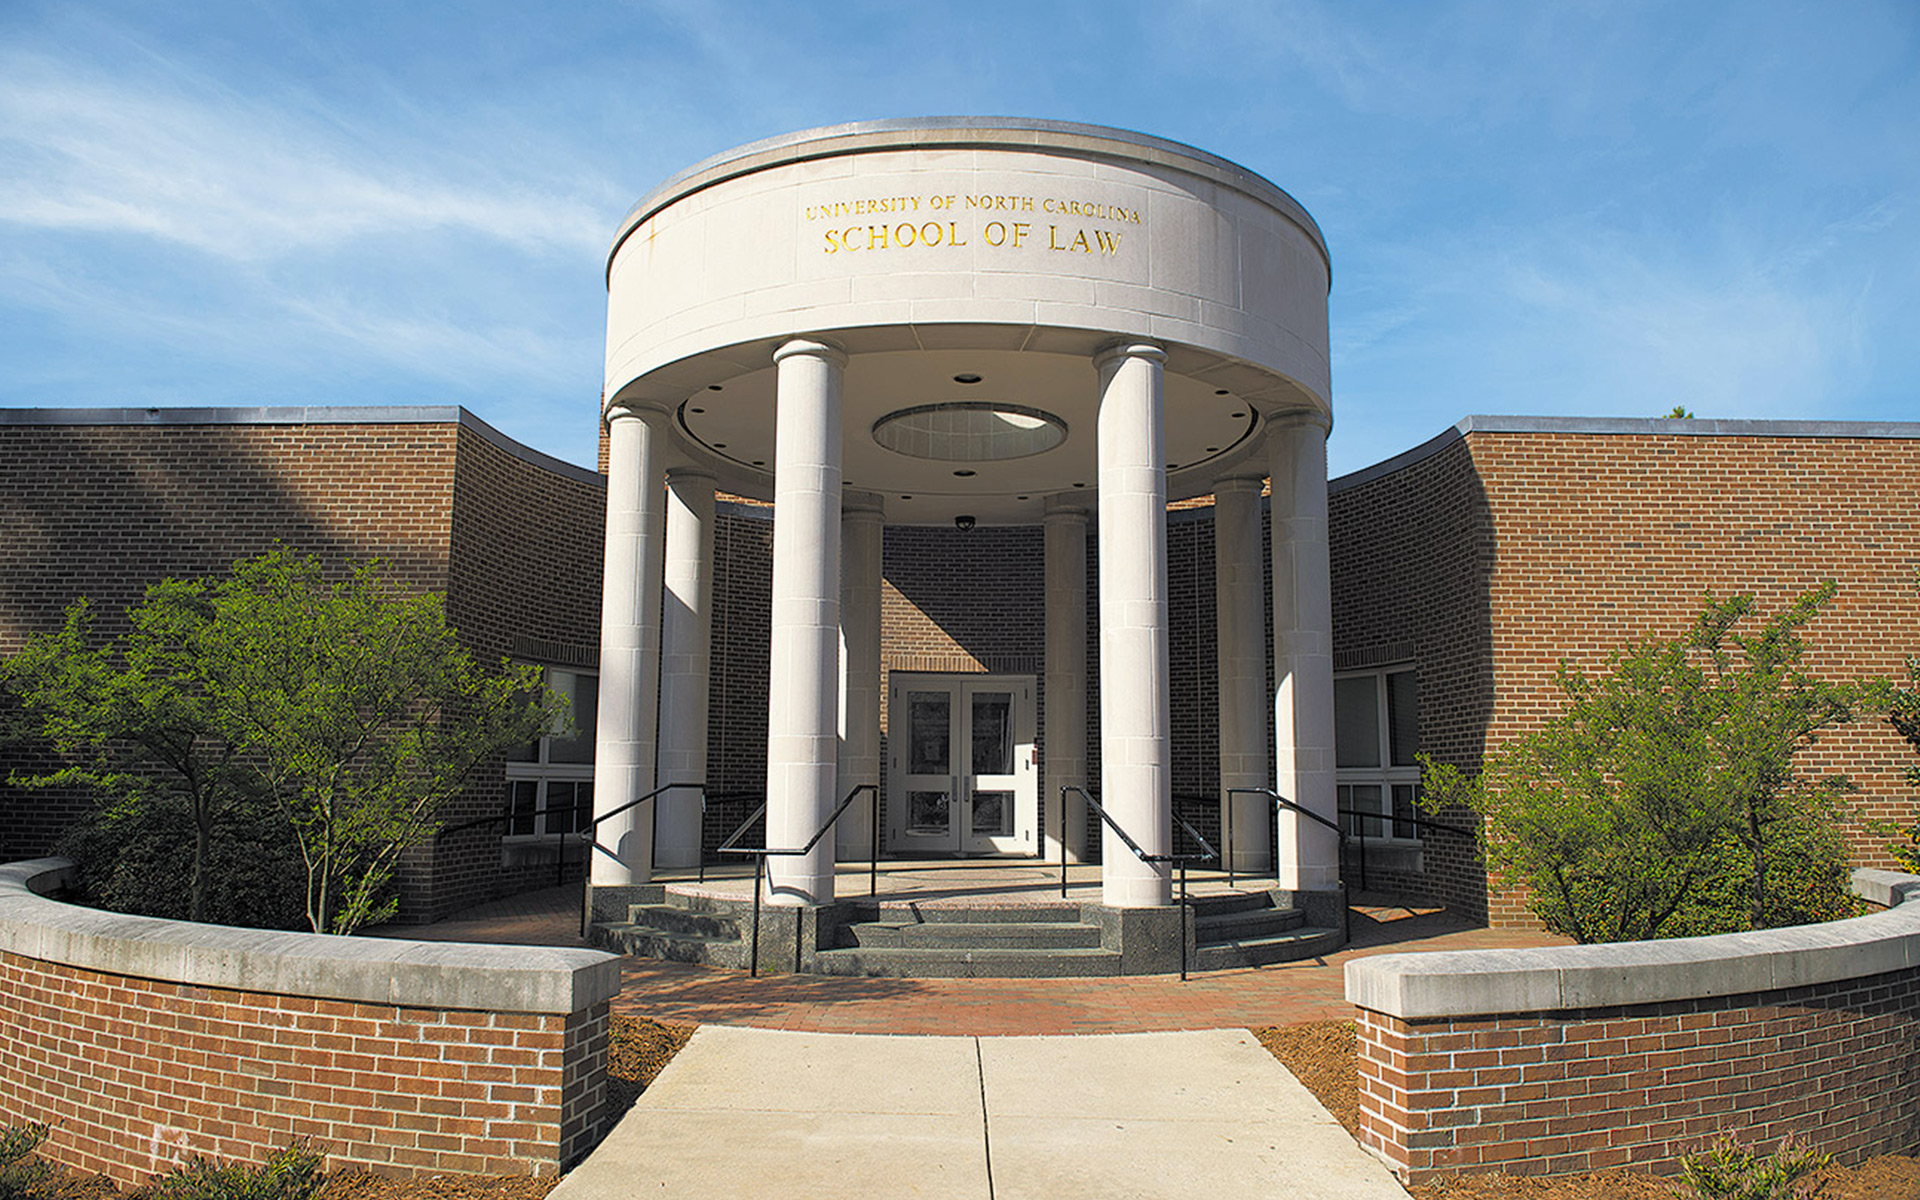 Extron XTP Systems and Annotator 300 Facilitate Courtroom Instruction at UNC School of Law